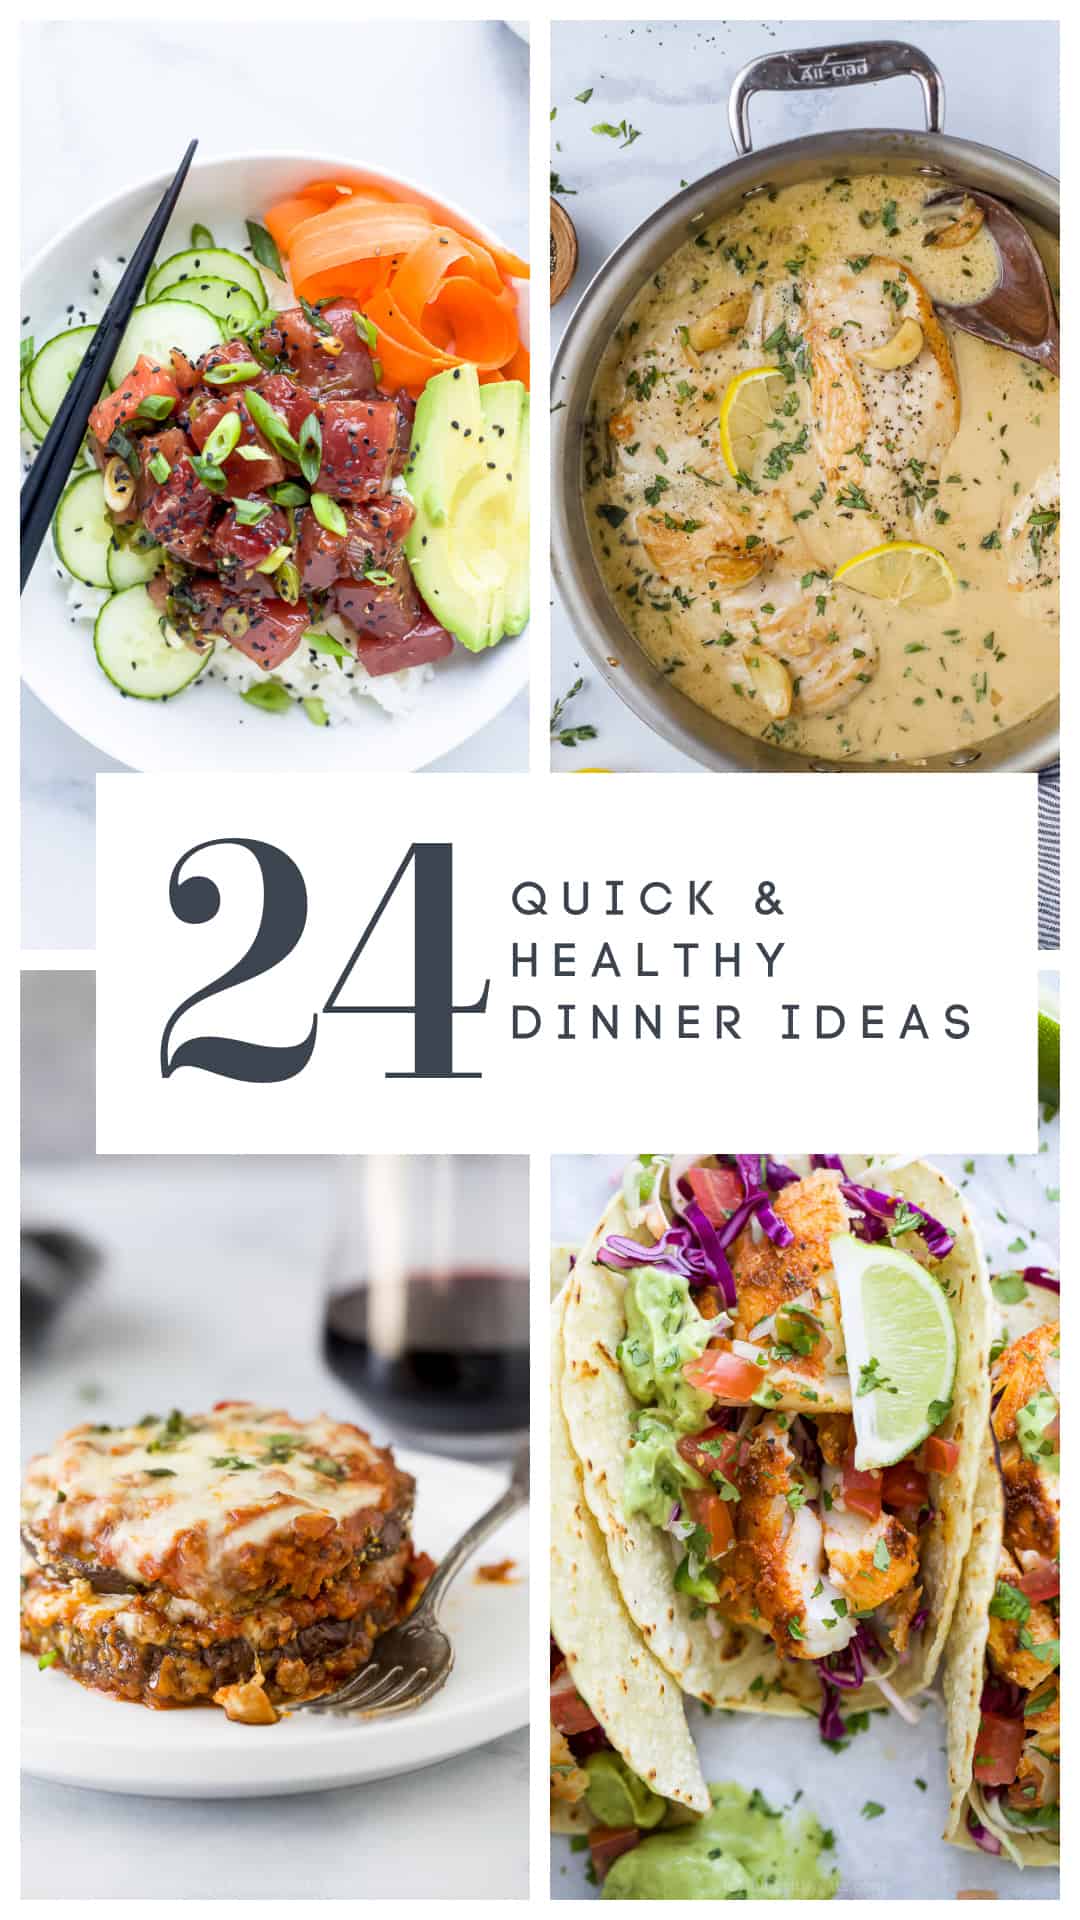 pinterest image for 24 Quick & Healthy Dinner Ideas